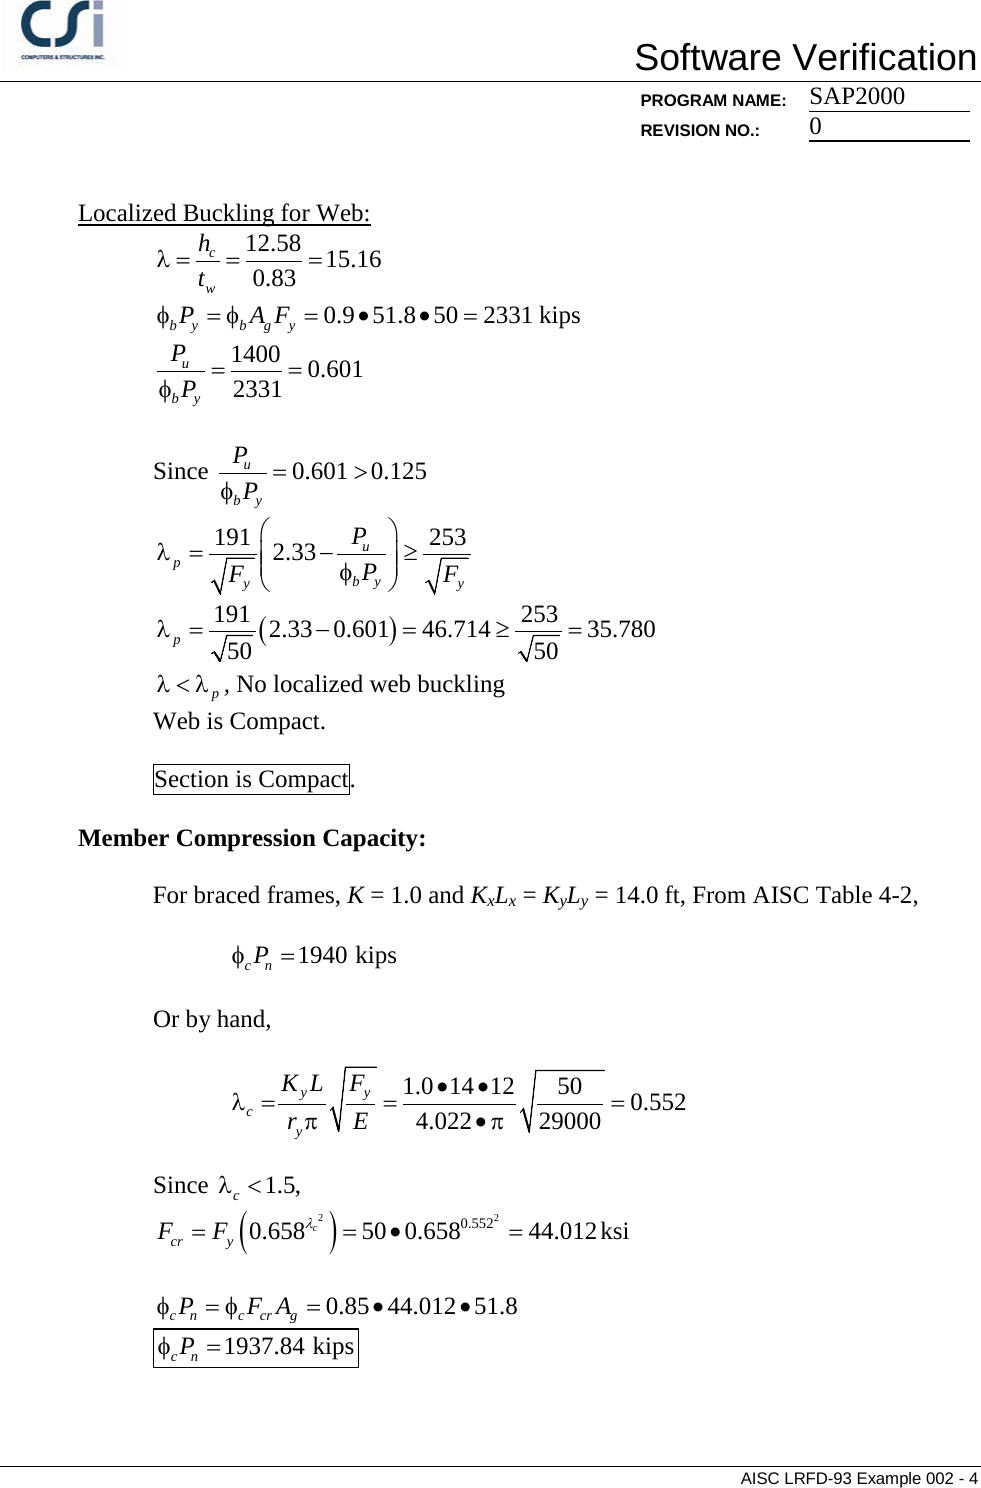 Page 4 of 7 - Contents AISC LRFD-93 Example 002